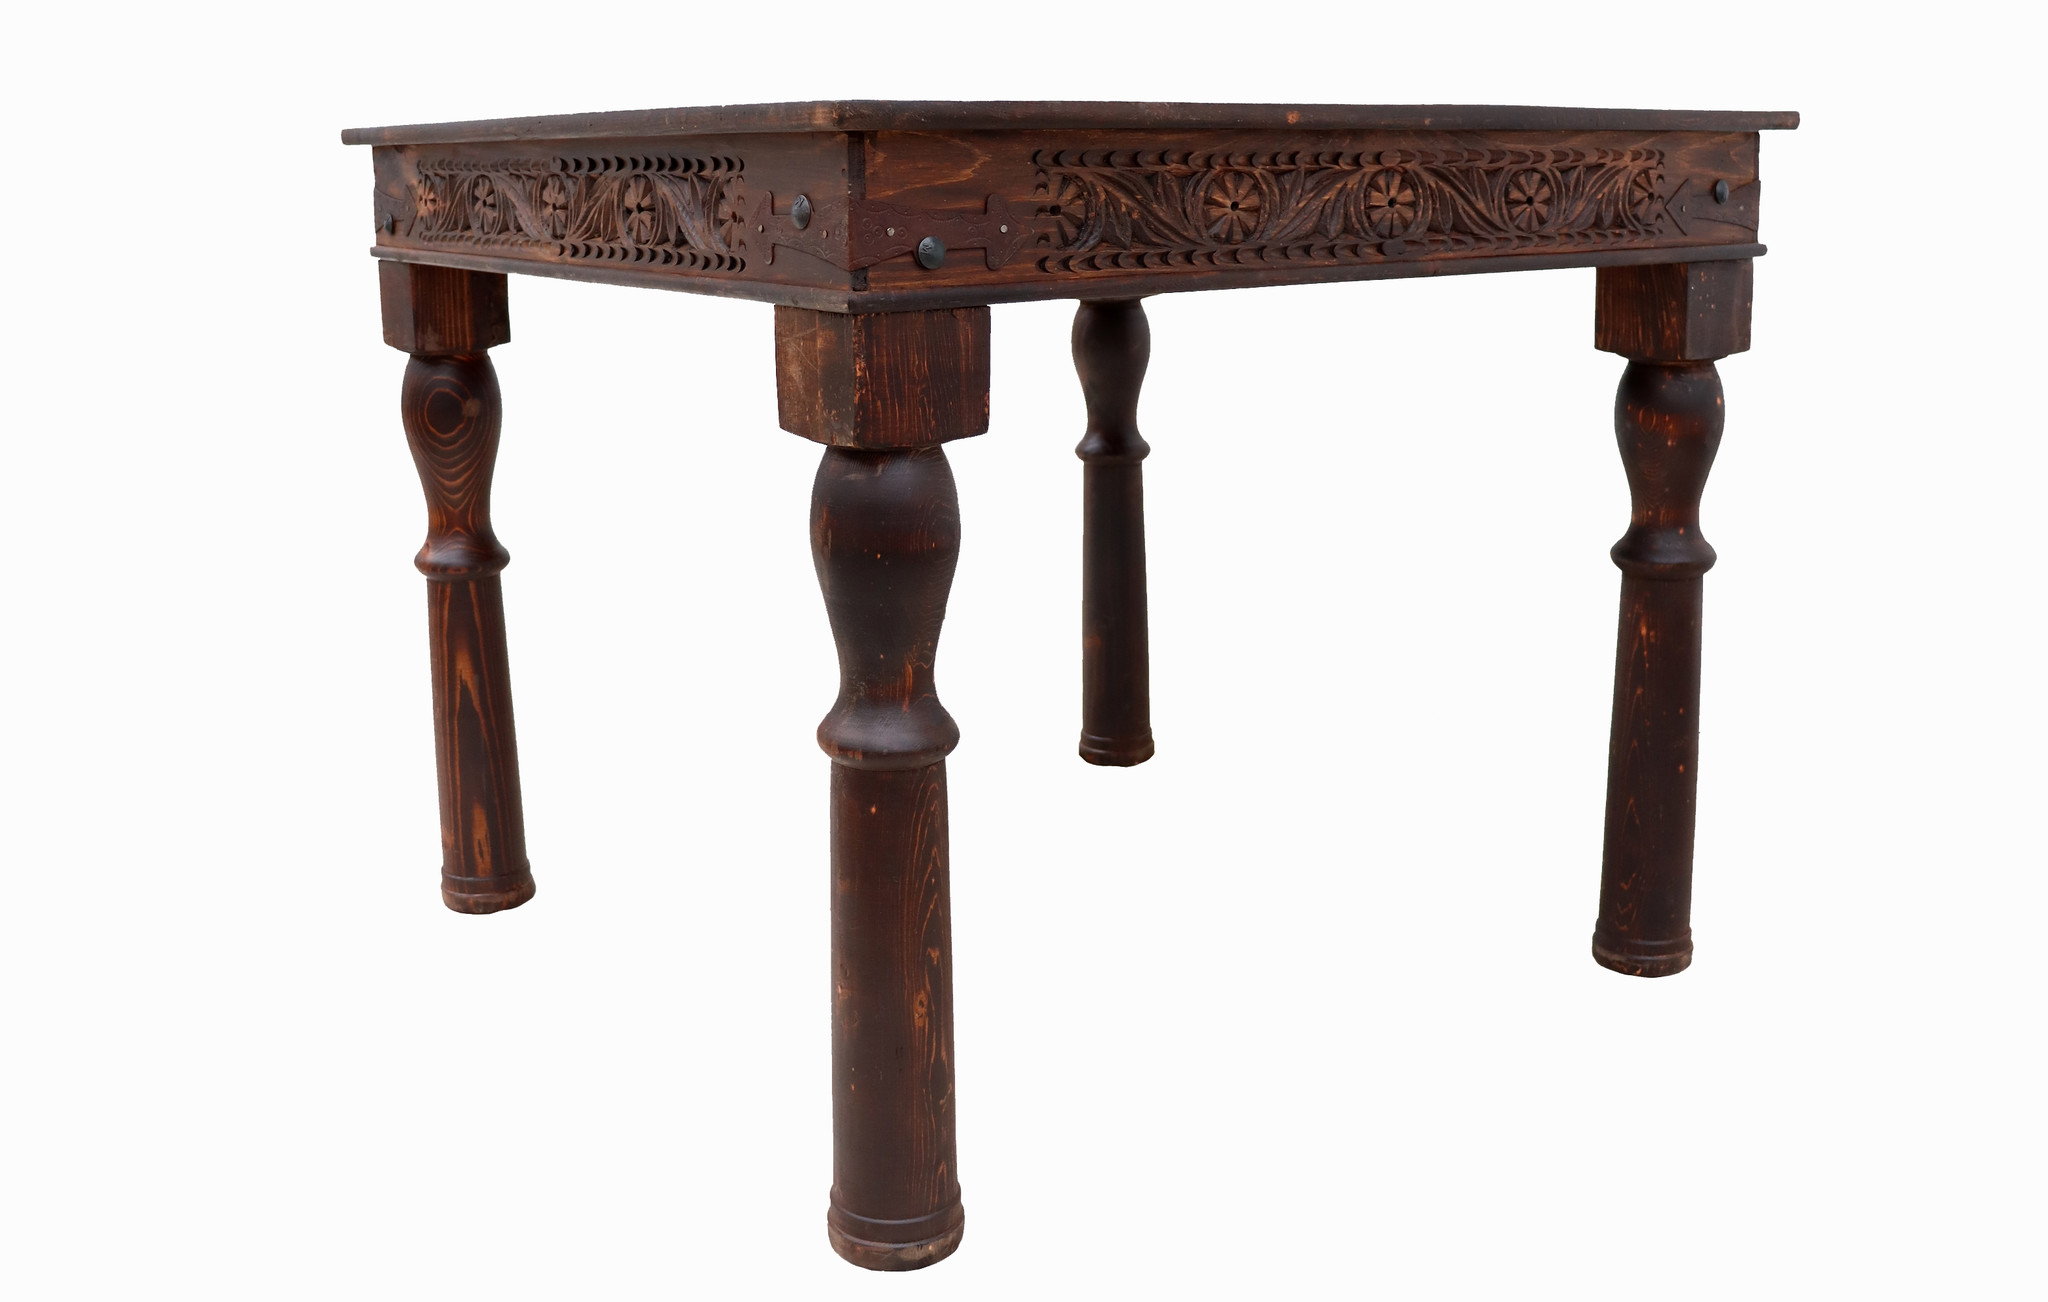 100x100  cm solid wood hand-carved table dining table from Afghanistan nuristan